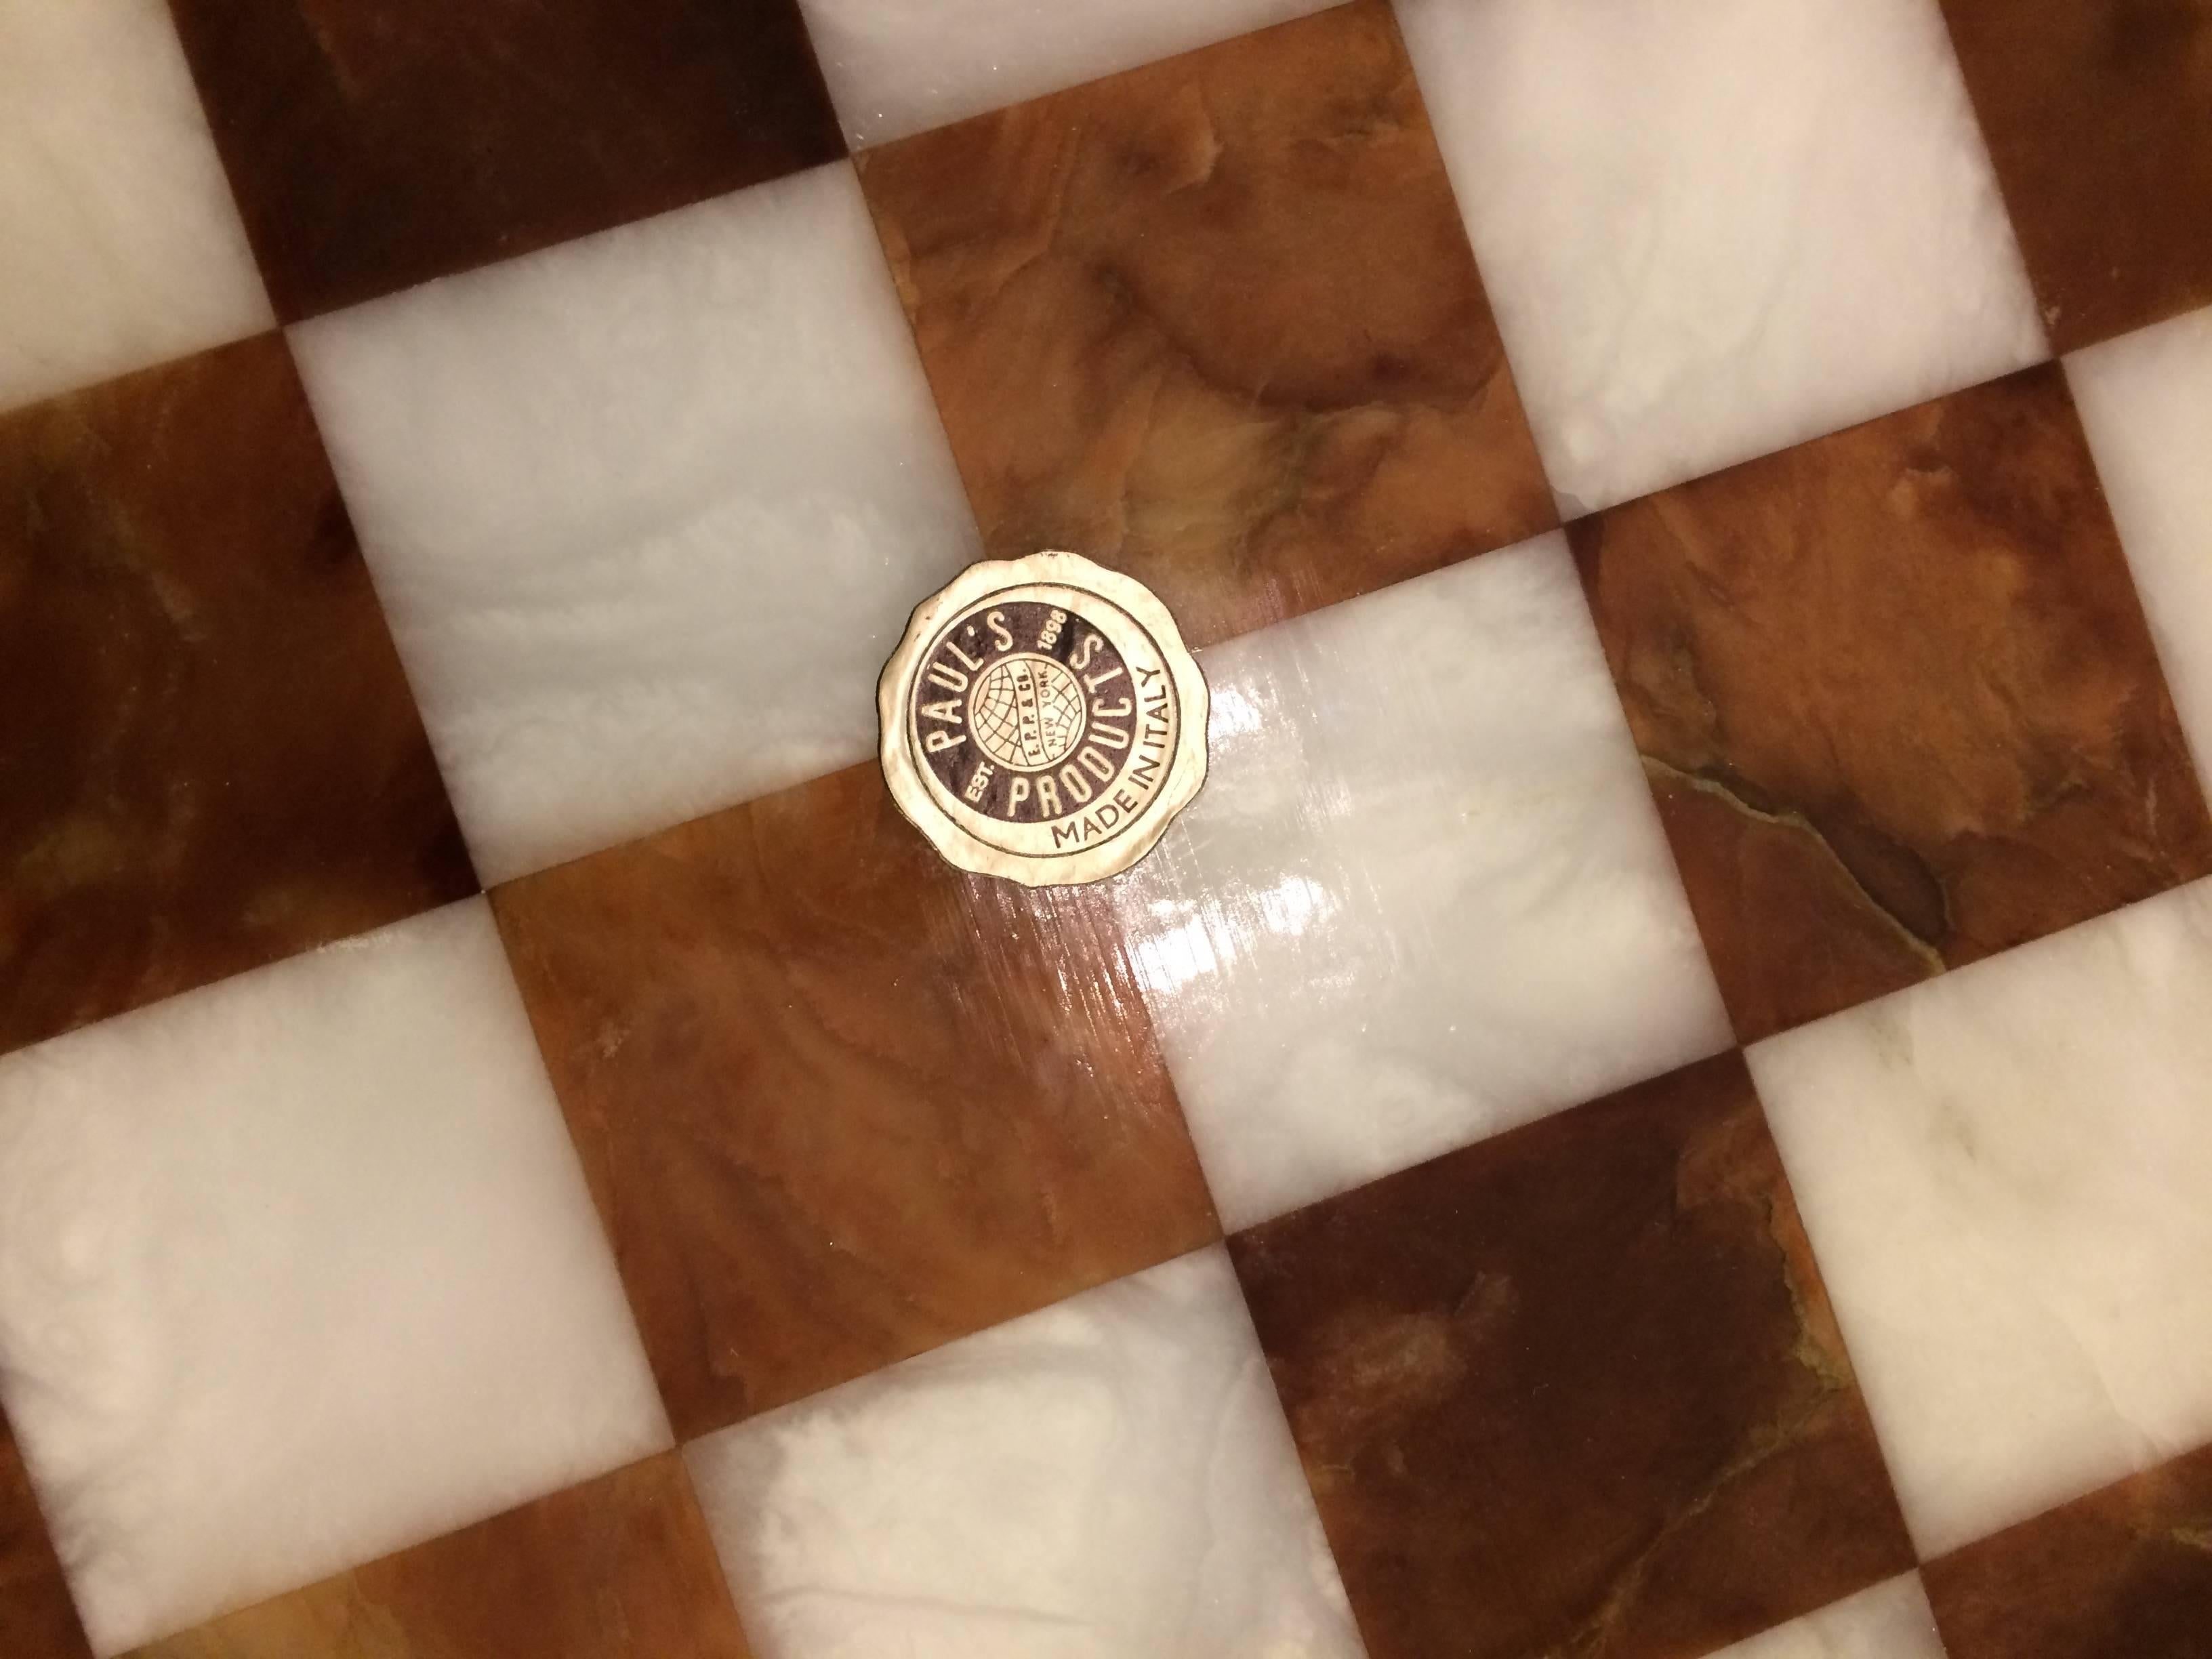 Beautifully made heavy checkers or chess board having amber and cream colored marble squares with a brass gallery. Made in Italy.